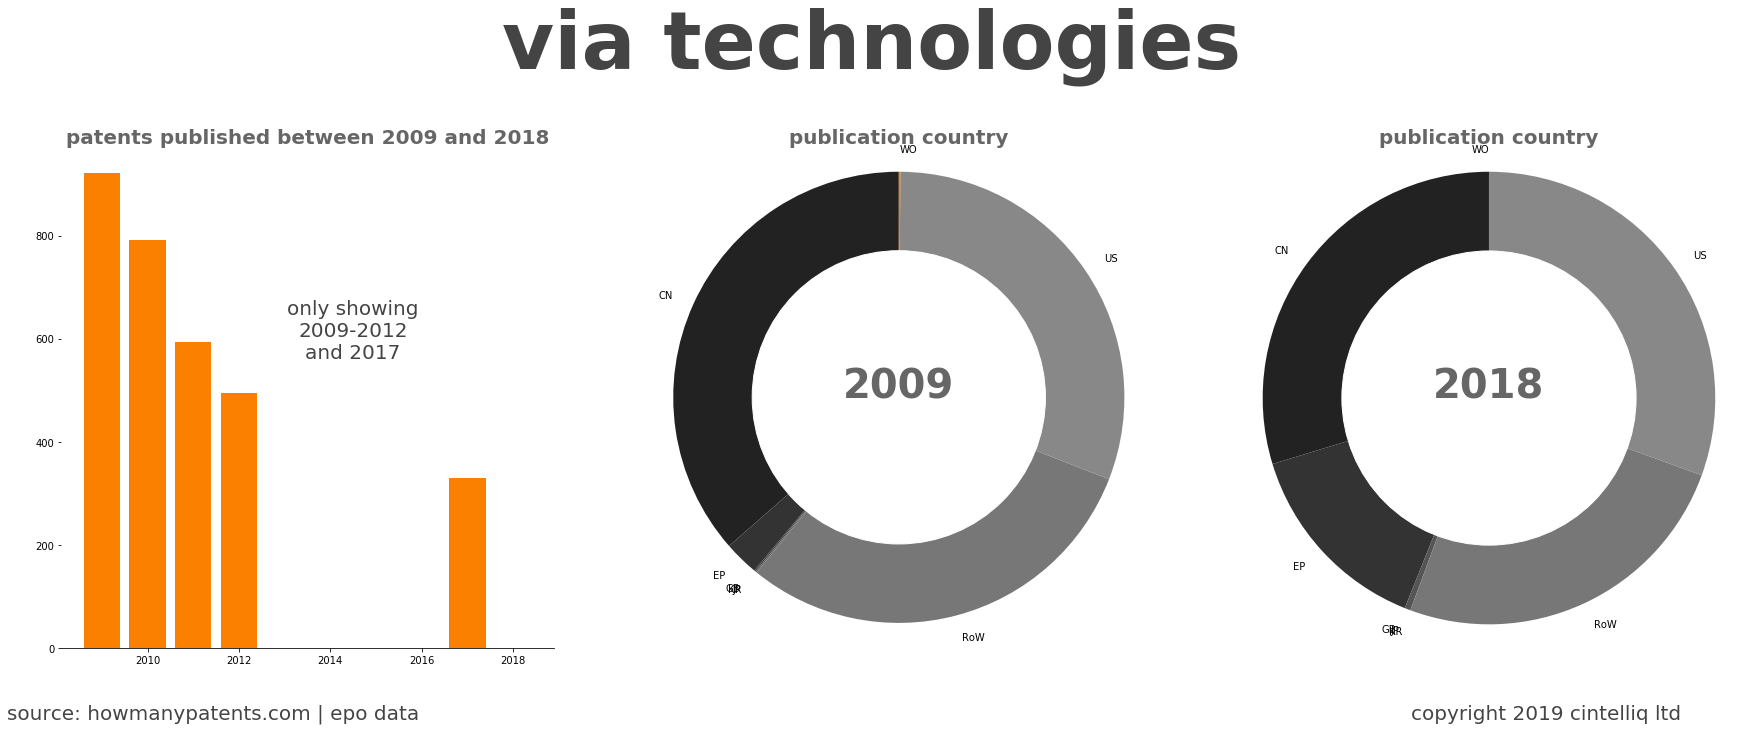 summary of patents for Via Technologies